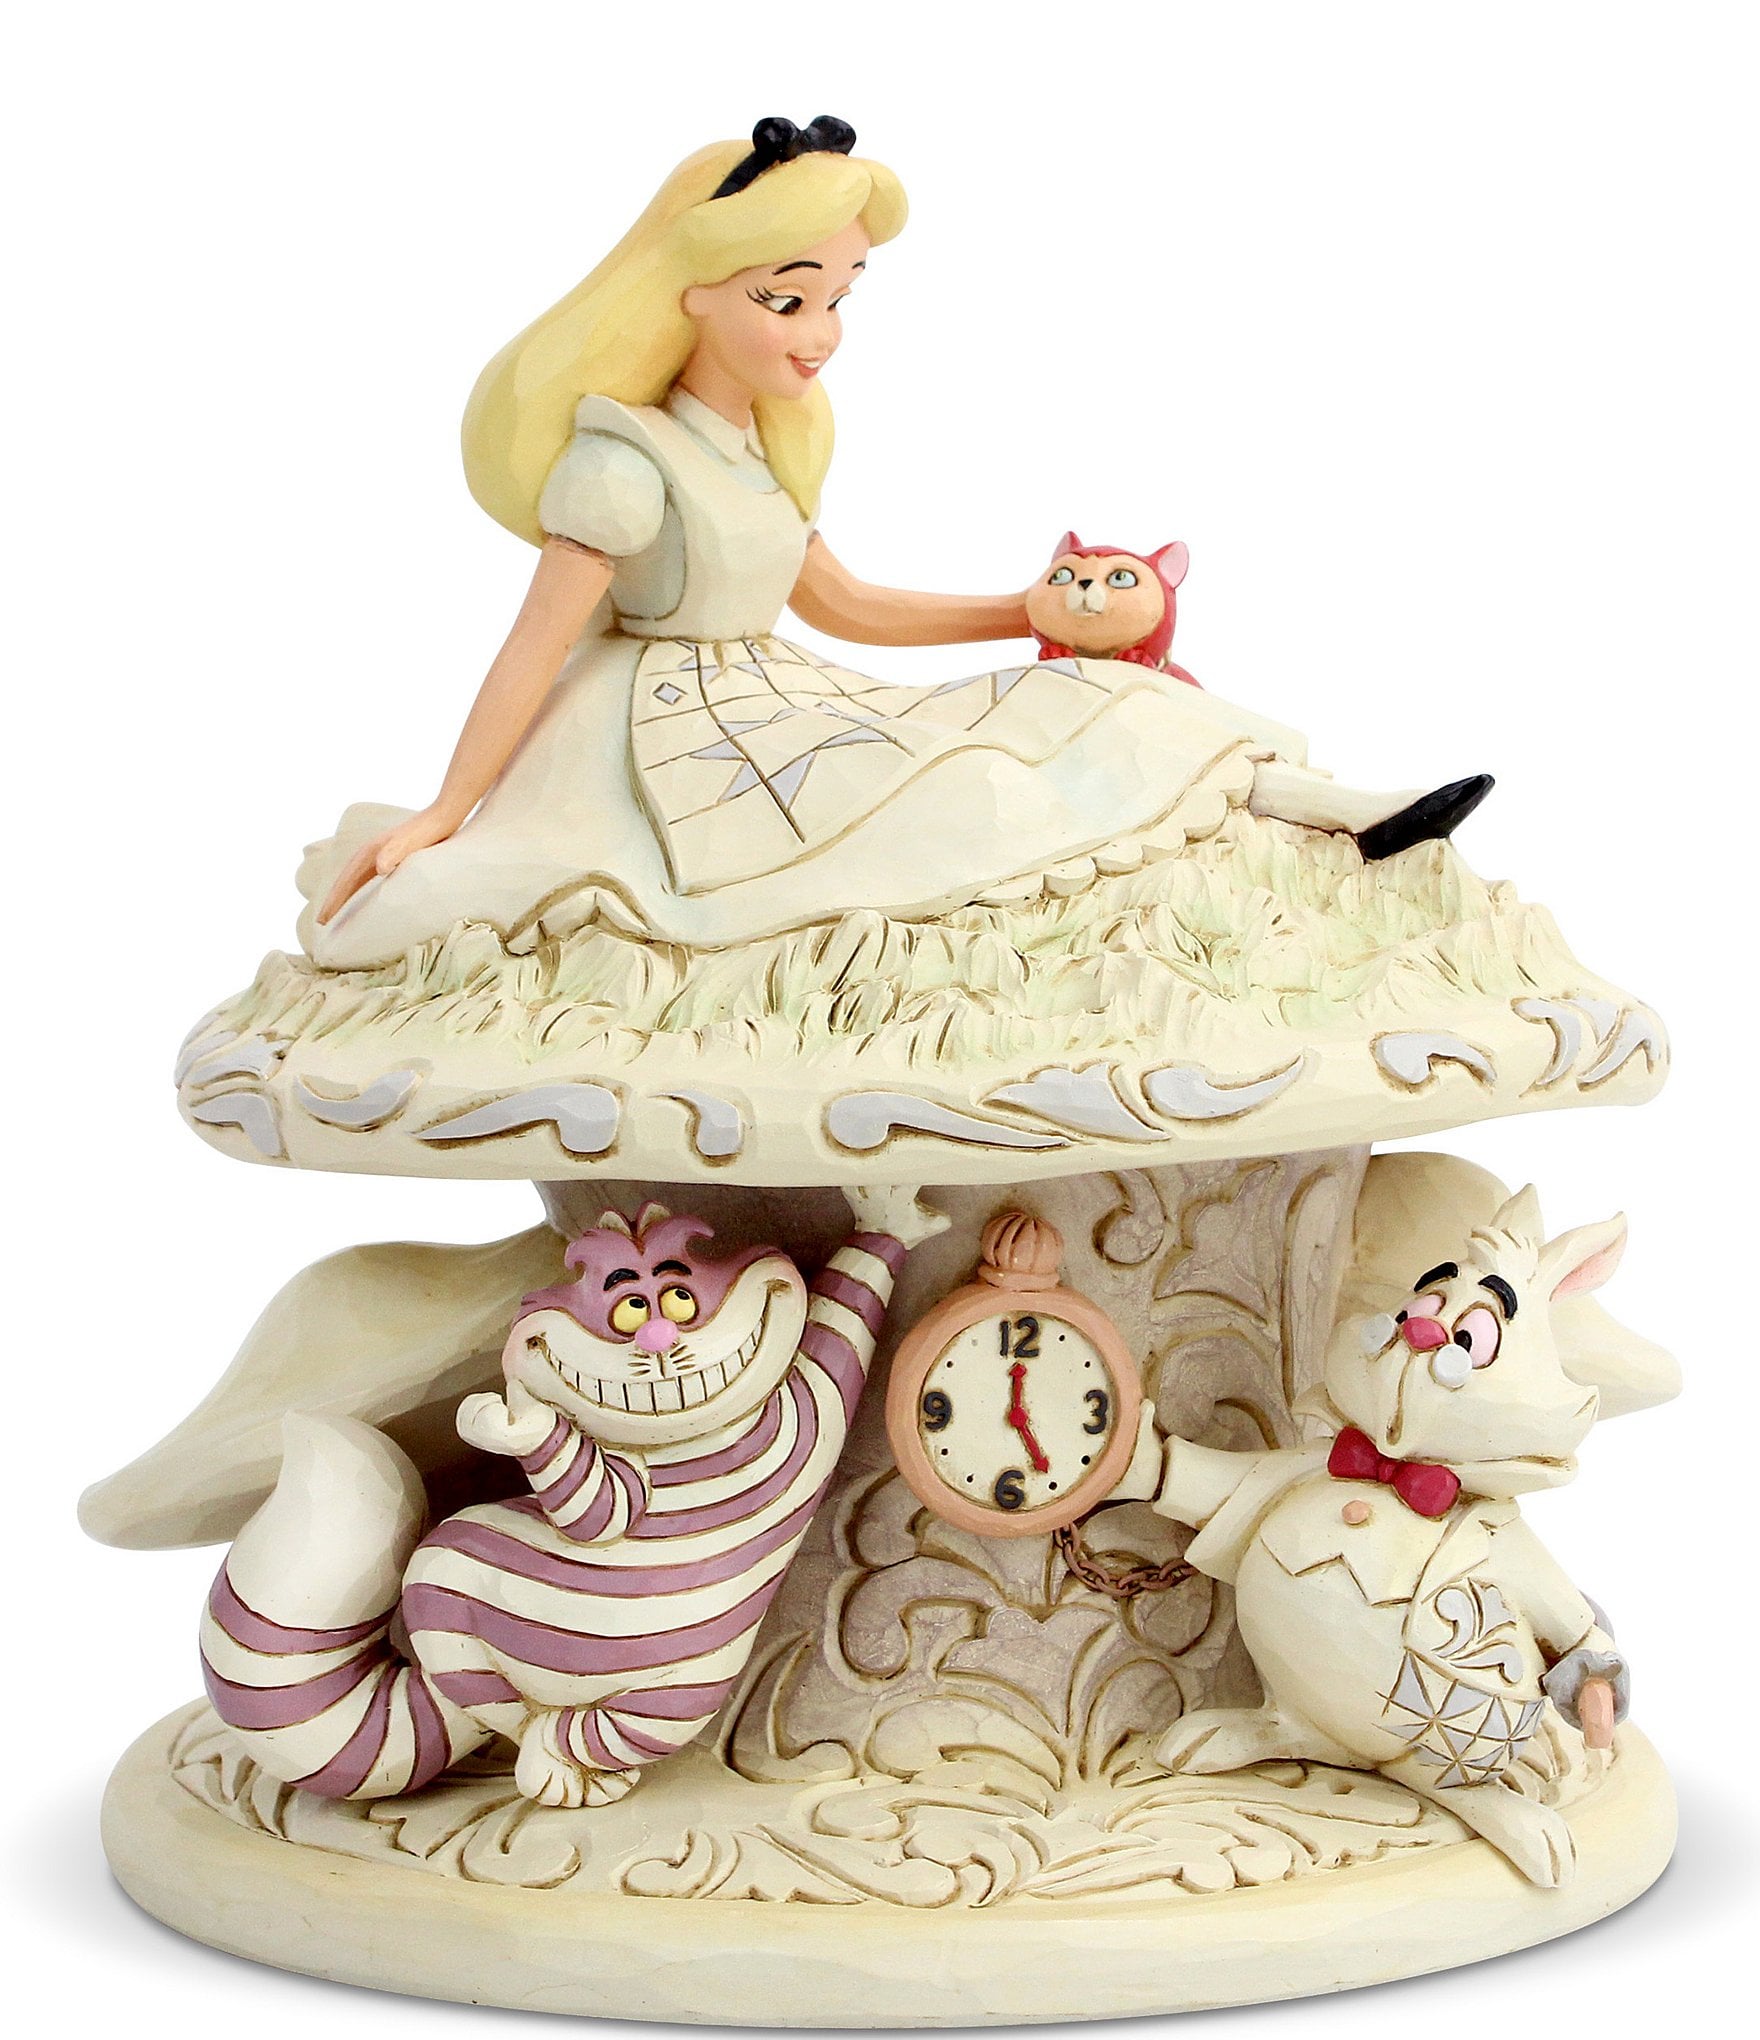 https://dimg.dillards.com/is/image/DillardsZoom/zoom/disney-traditions-collection-by-jim-shore-alice-in-wonderland-whimsy-and-wonder-white-woodland--figurine/20048693_zi.jpg